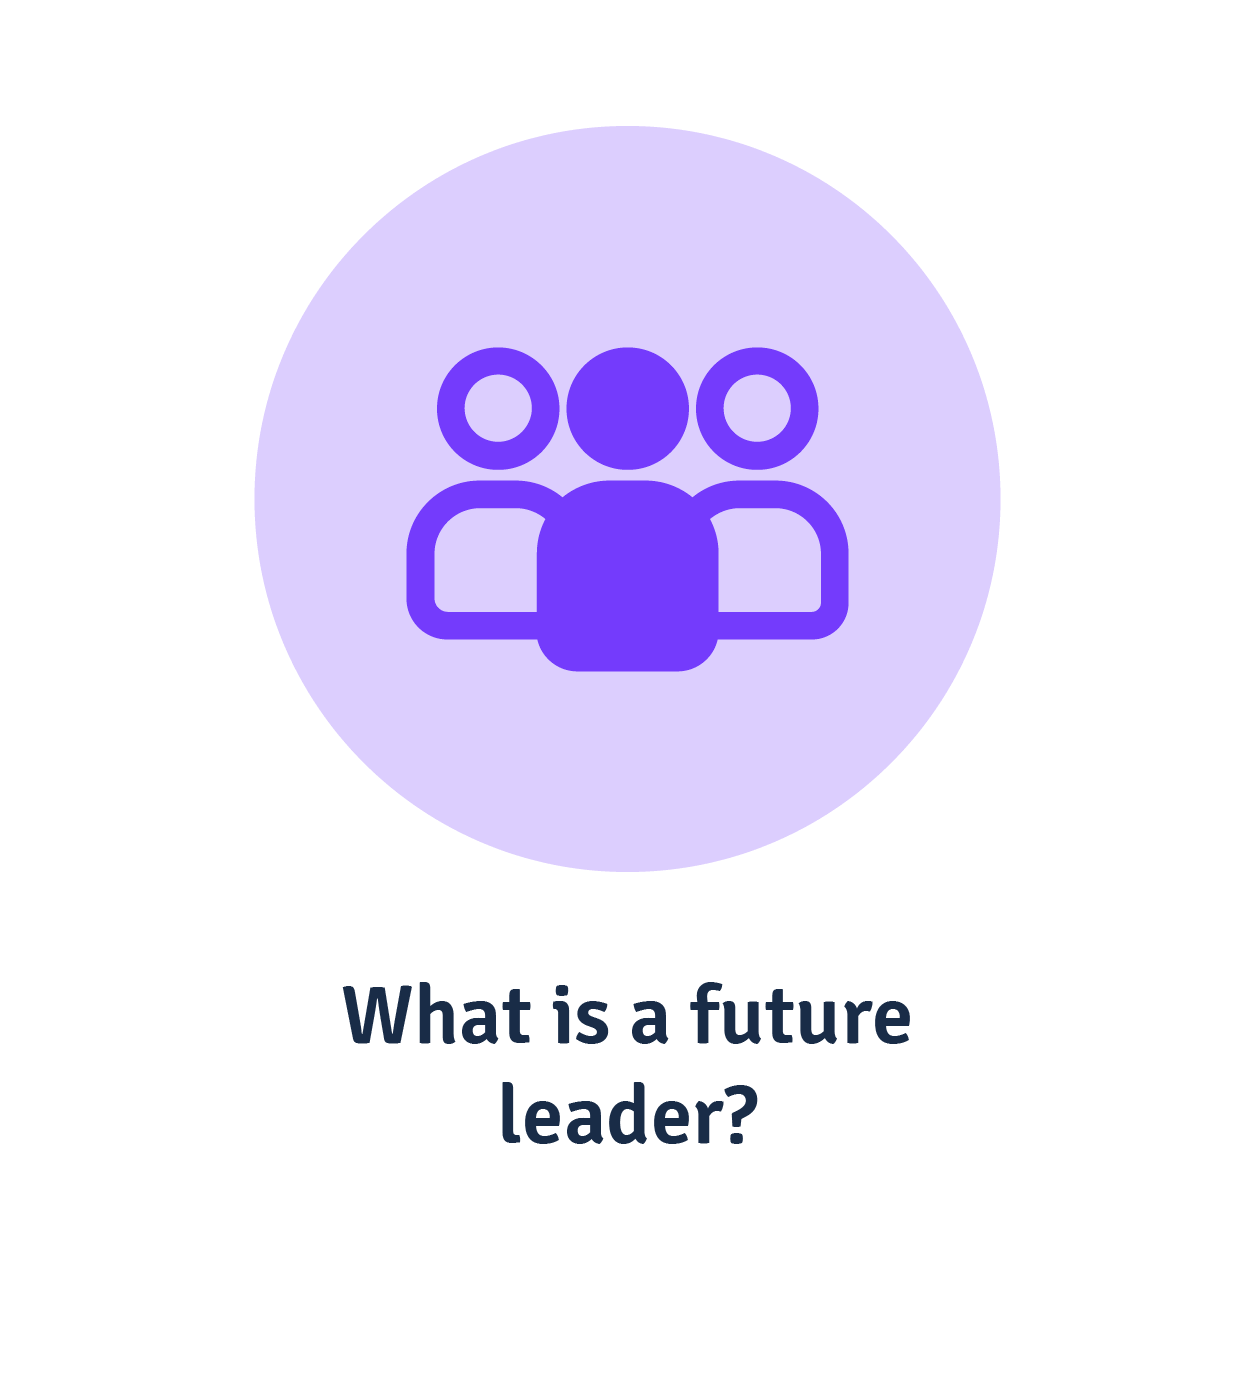 What is a future leader